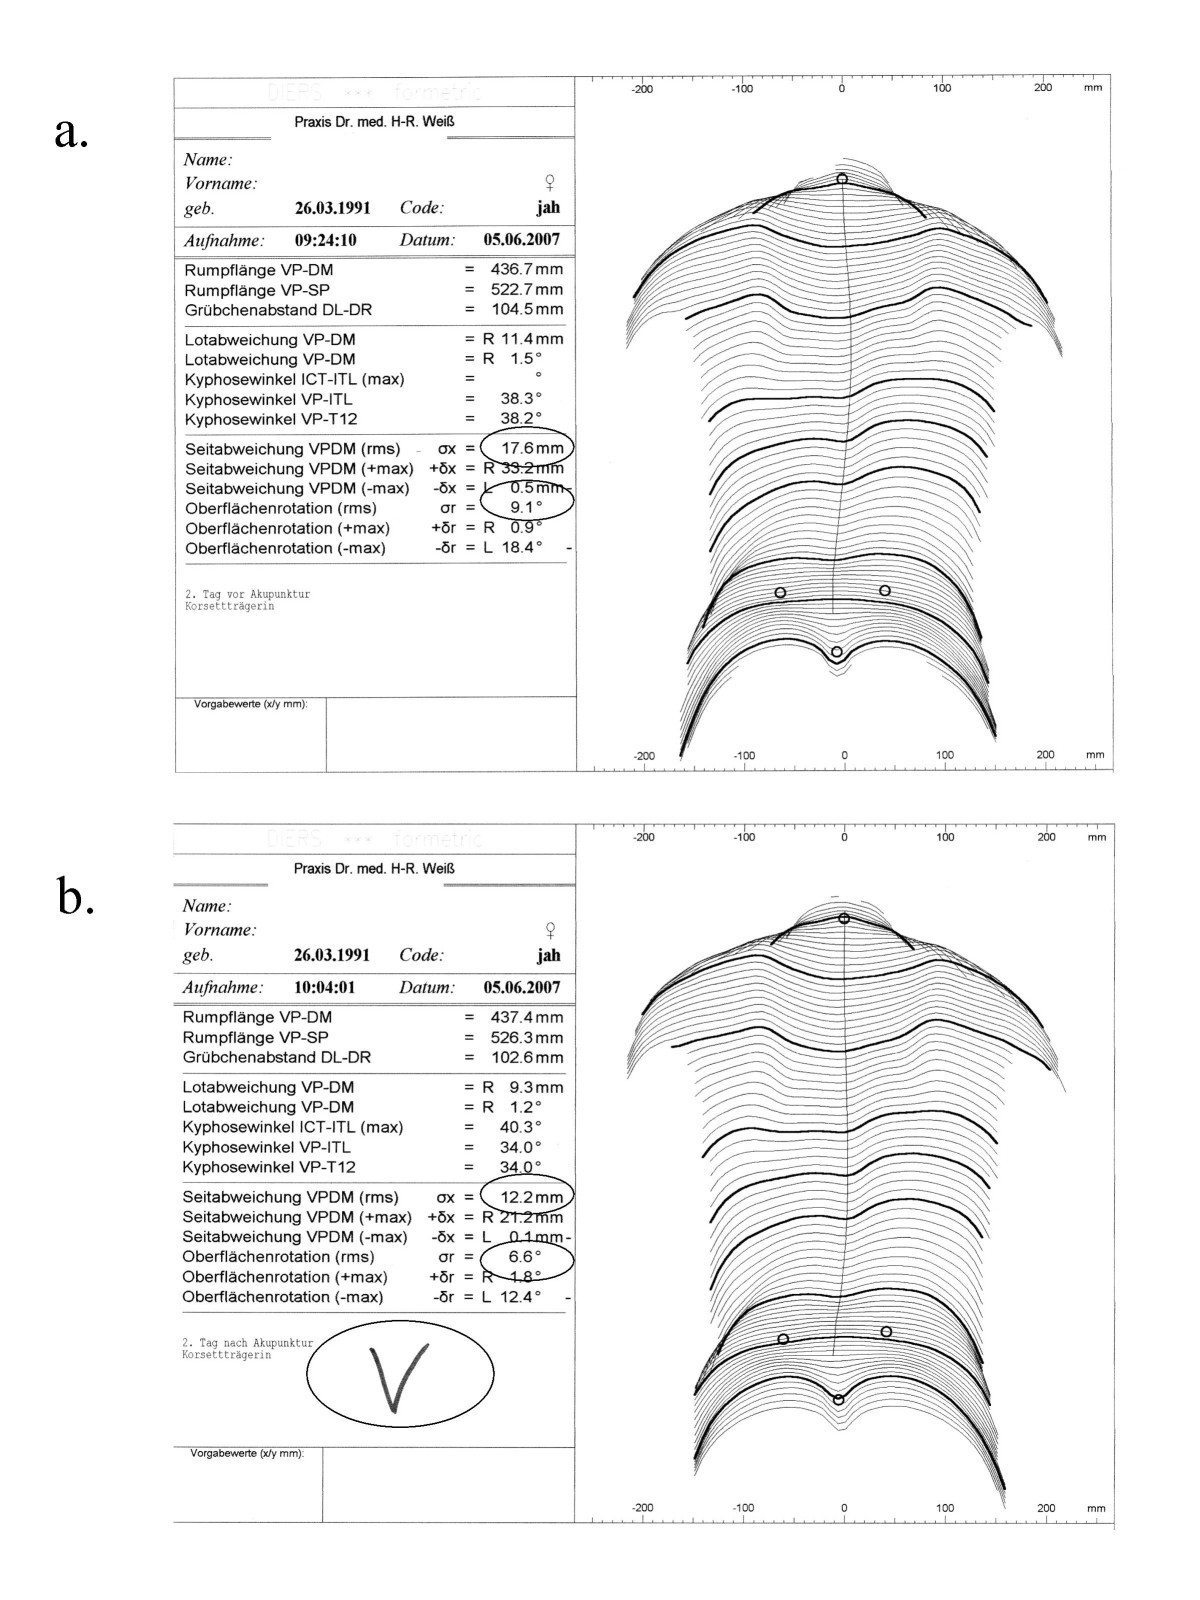 Bourgogne Spiller skak mytologi Acupucture in the treatment of scoliosis – a single blind controlled pilot  study | Scoliosis and Spinal Disorders | Full Text